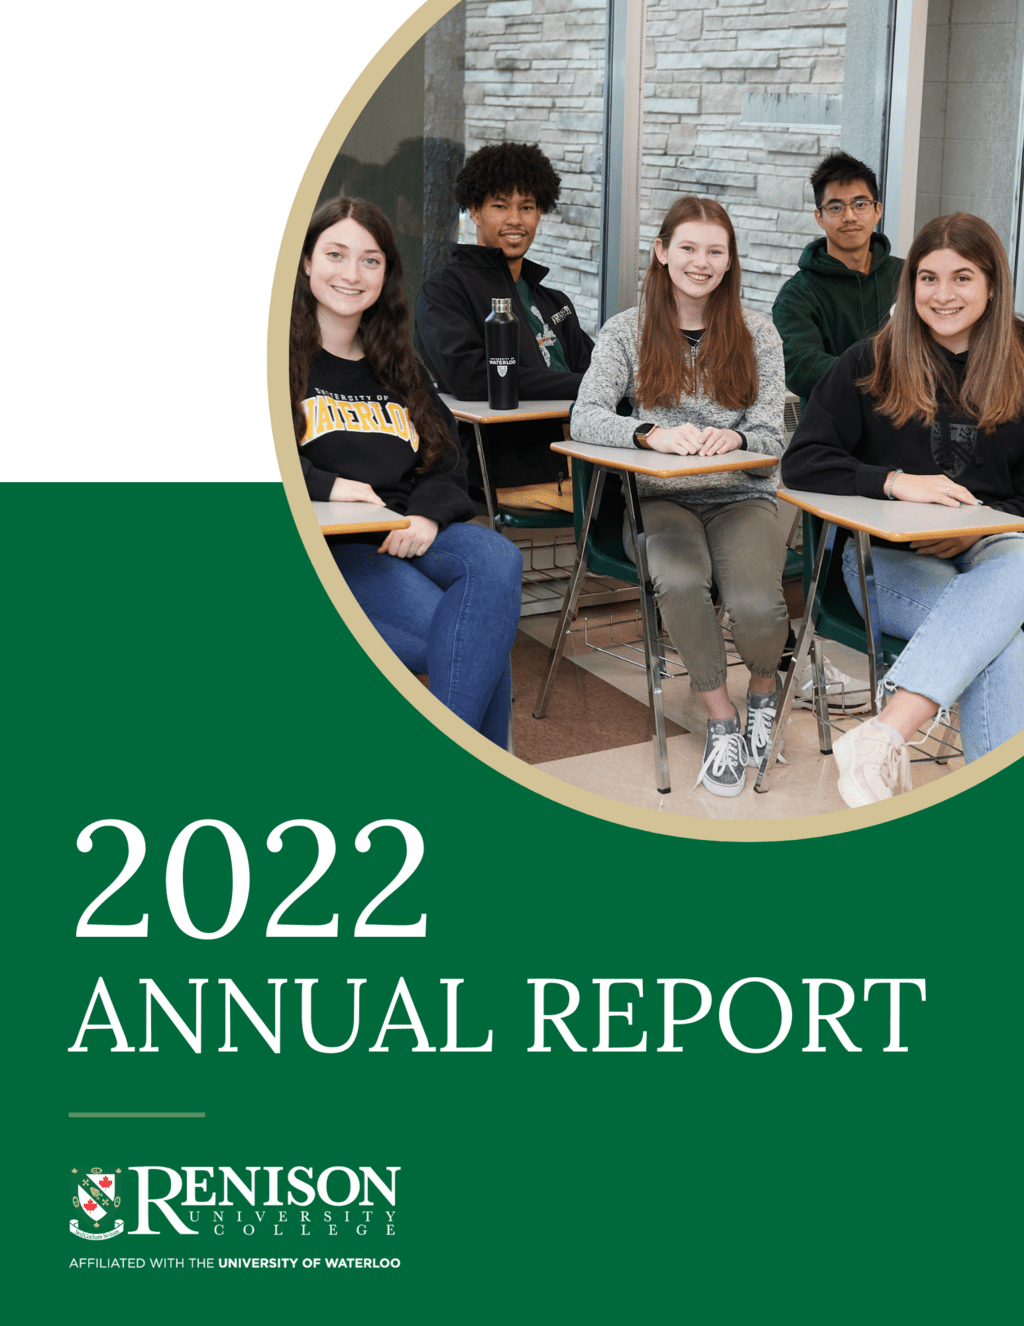 Annual report cover. Text reads: 2022 Annual Report. Includes image of five students at desk smiling at the camera.